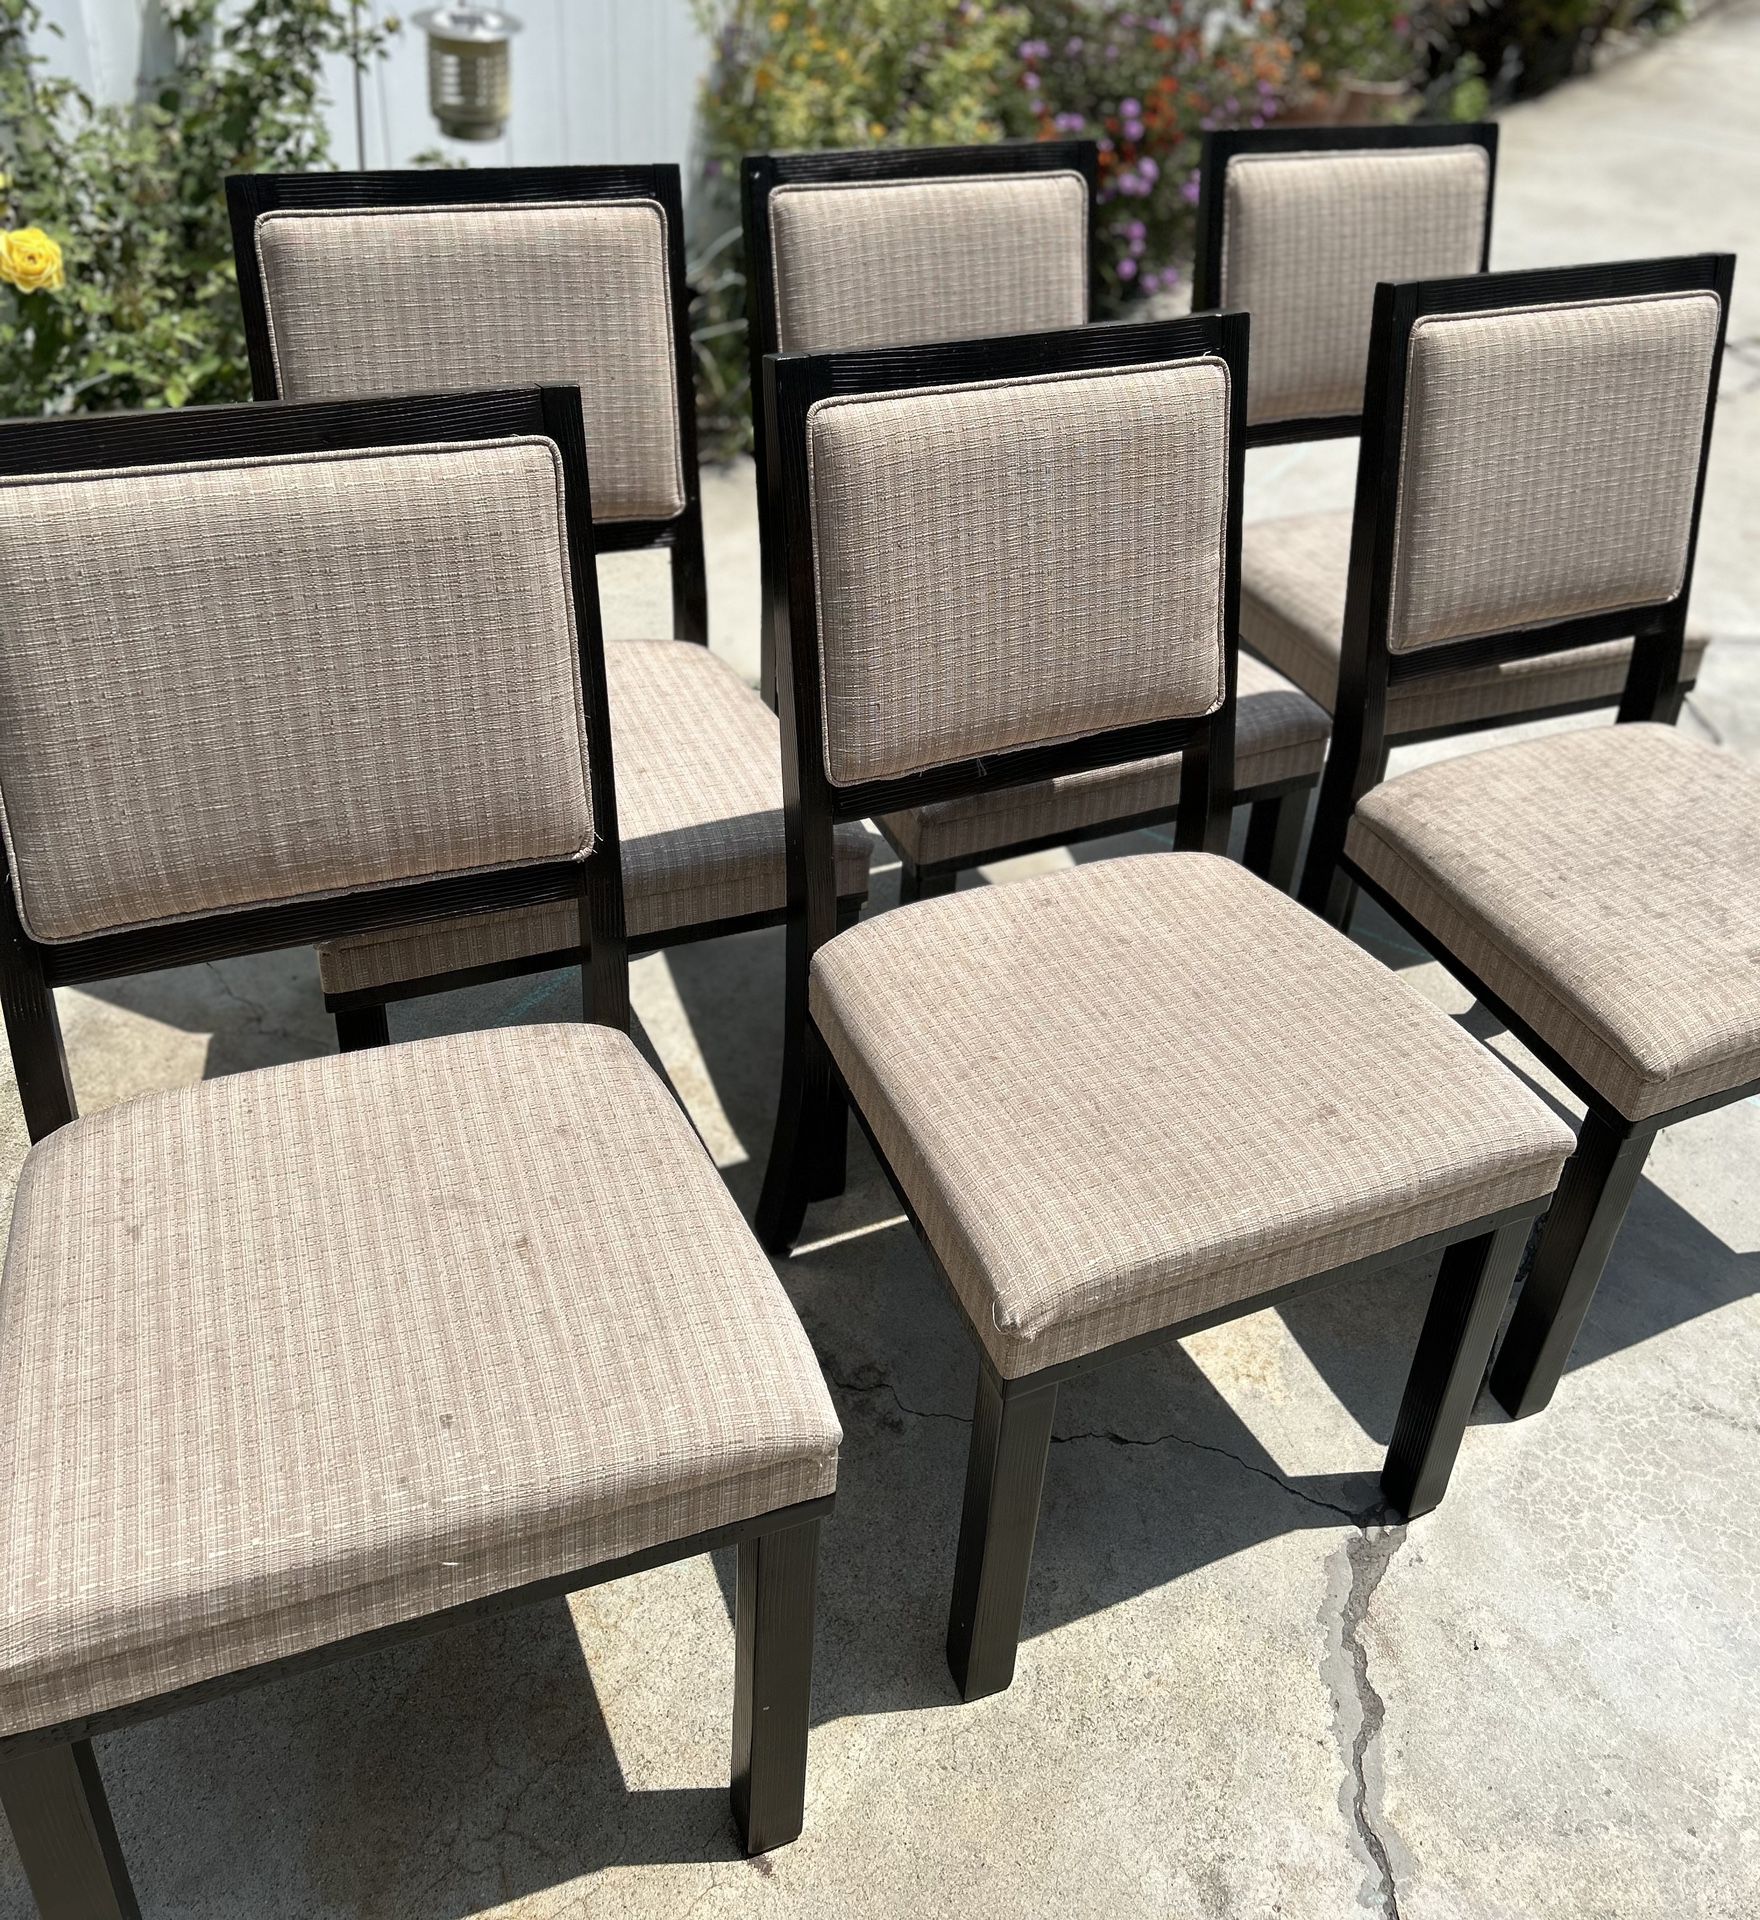 Wooden Chairs For Sale (set Of 6)